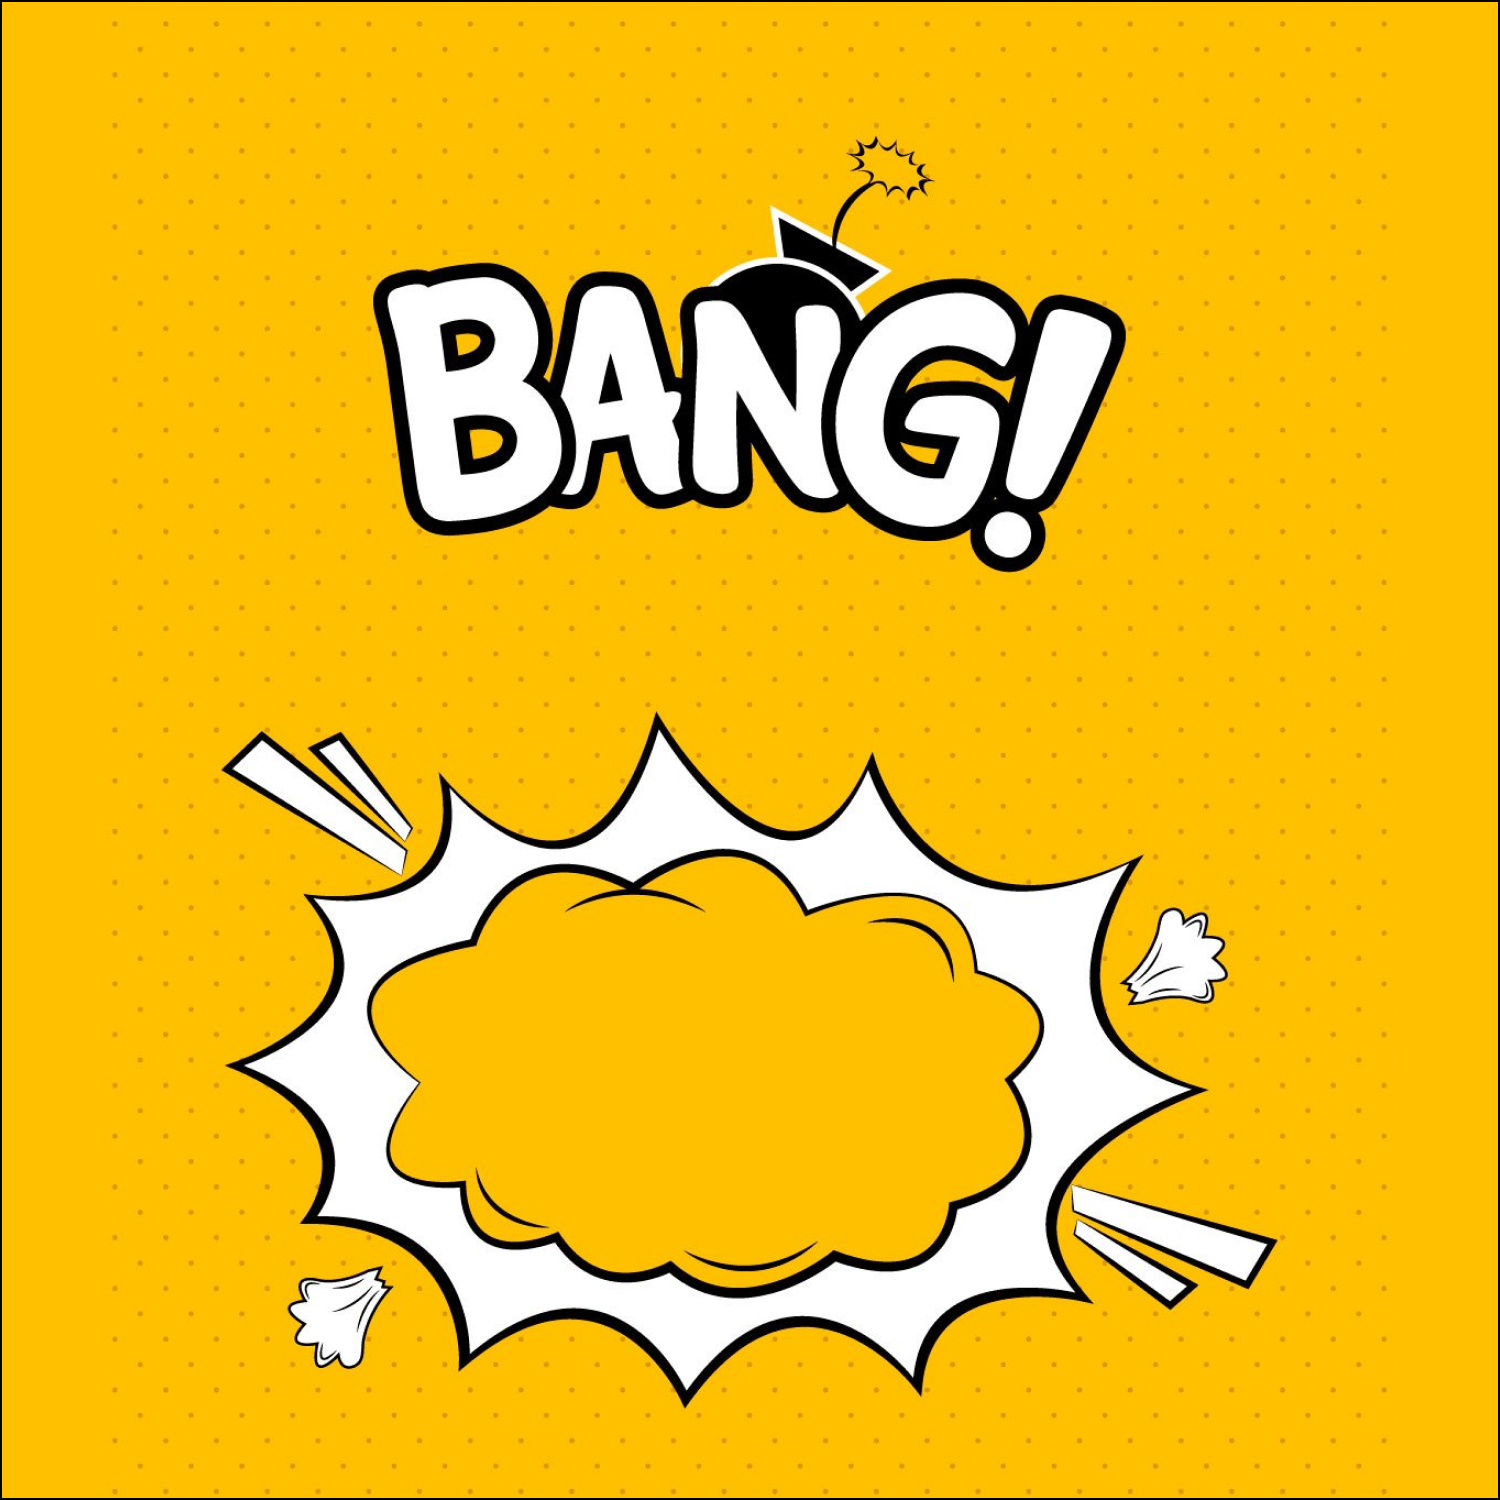 Bang Comic Explosion with a Bomb cover.